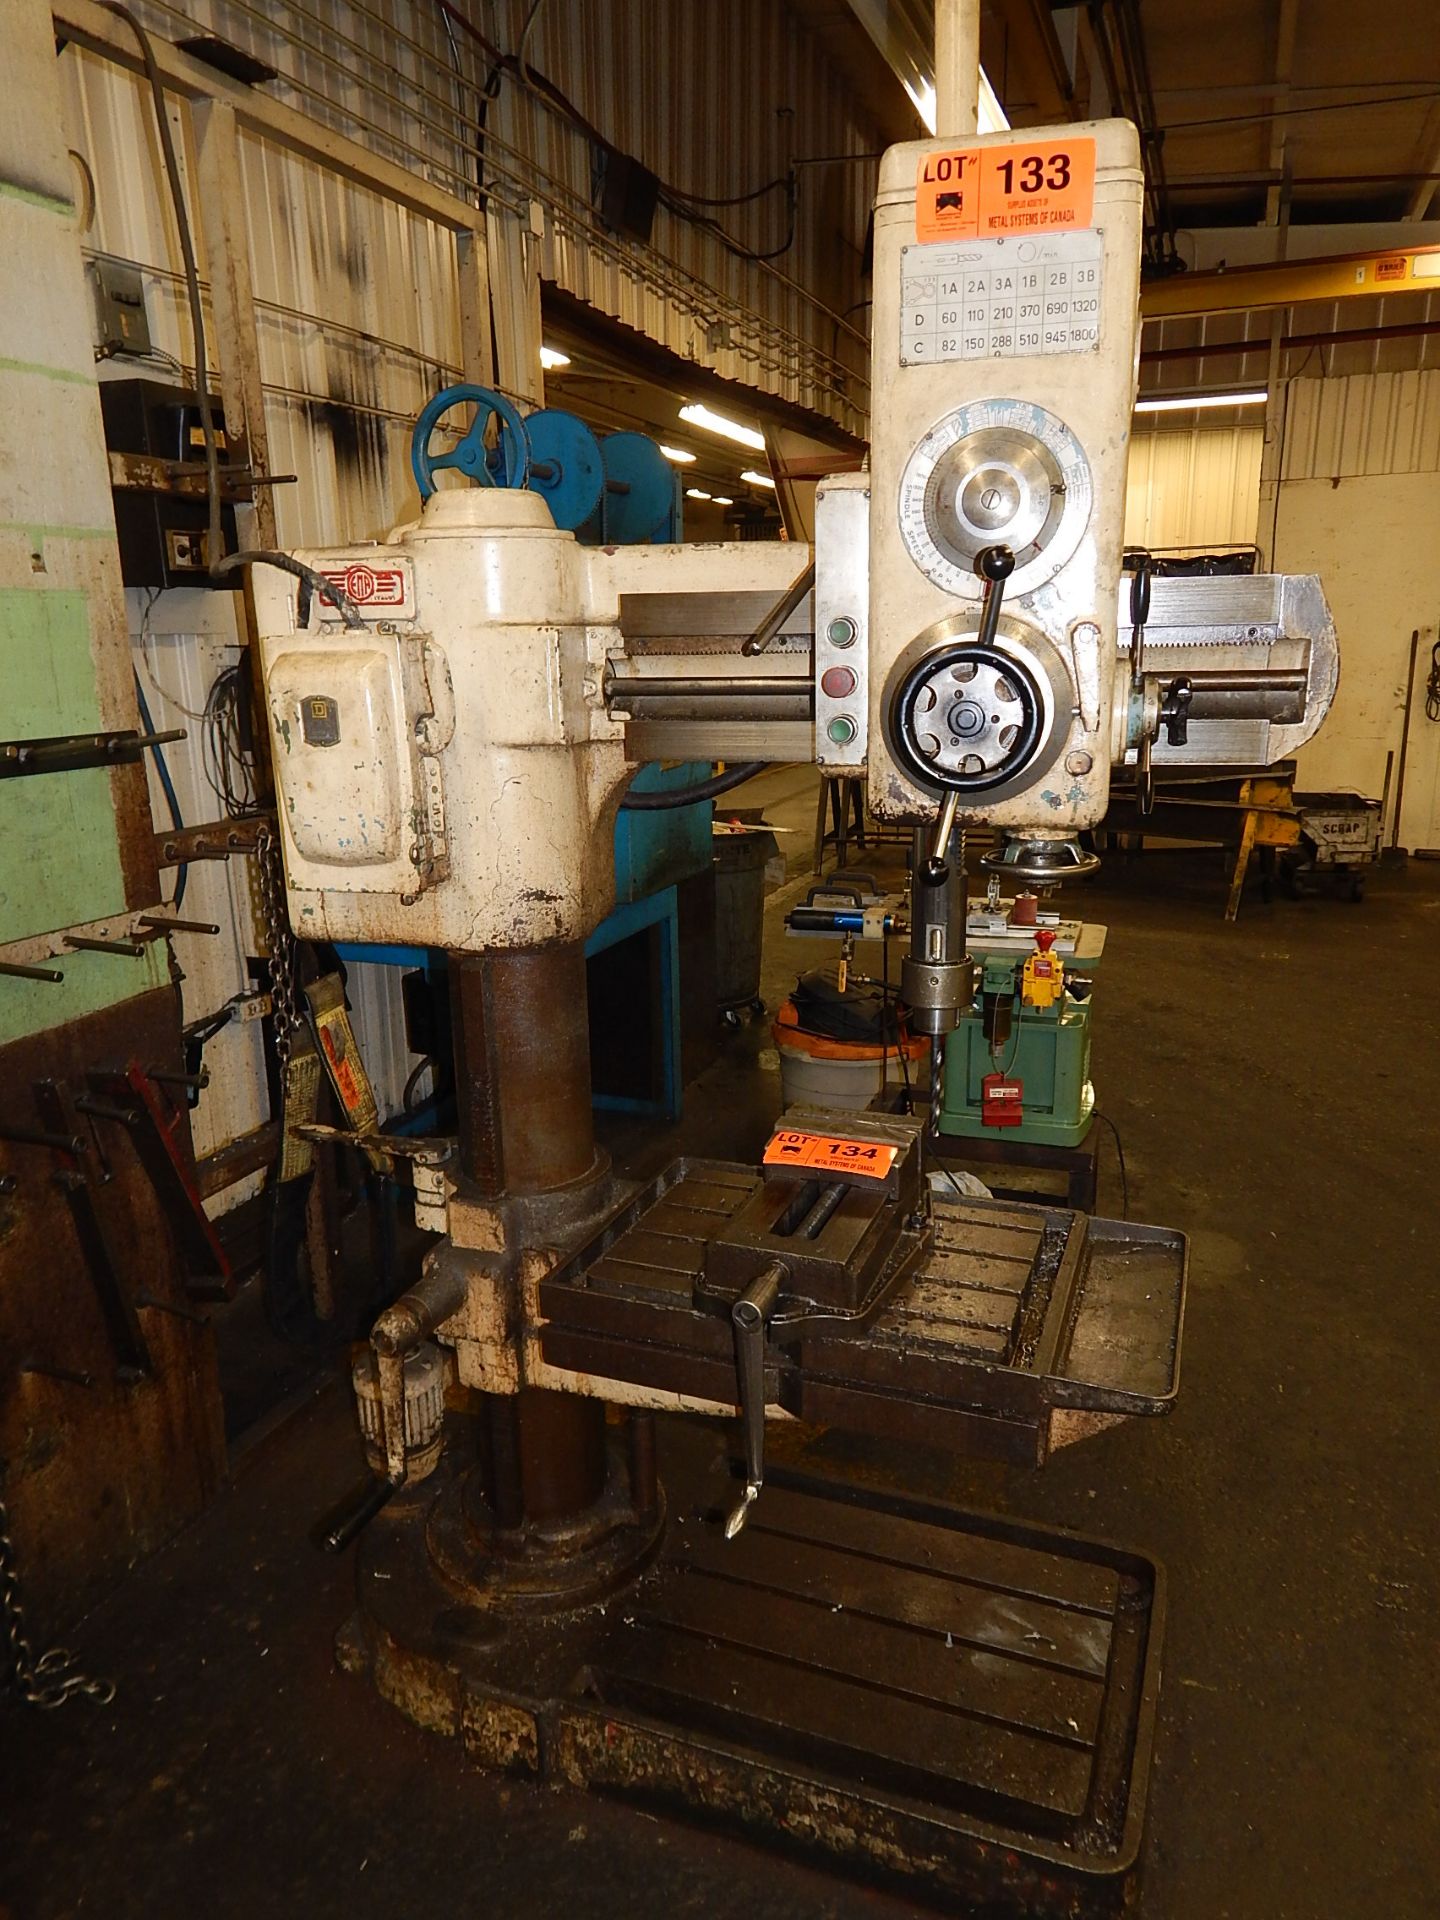 EMA/UCIMU 24872 RADIAL ARM DRILL WITH 3HP ELECTRIC MOTOR, SPEEDS TO 1800RPM, 20" ARM, 24" X 18" T-